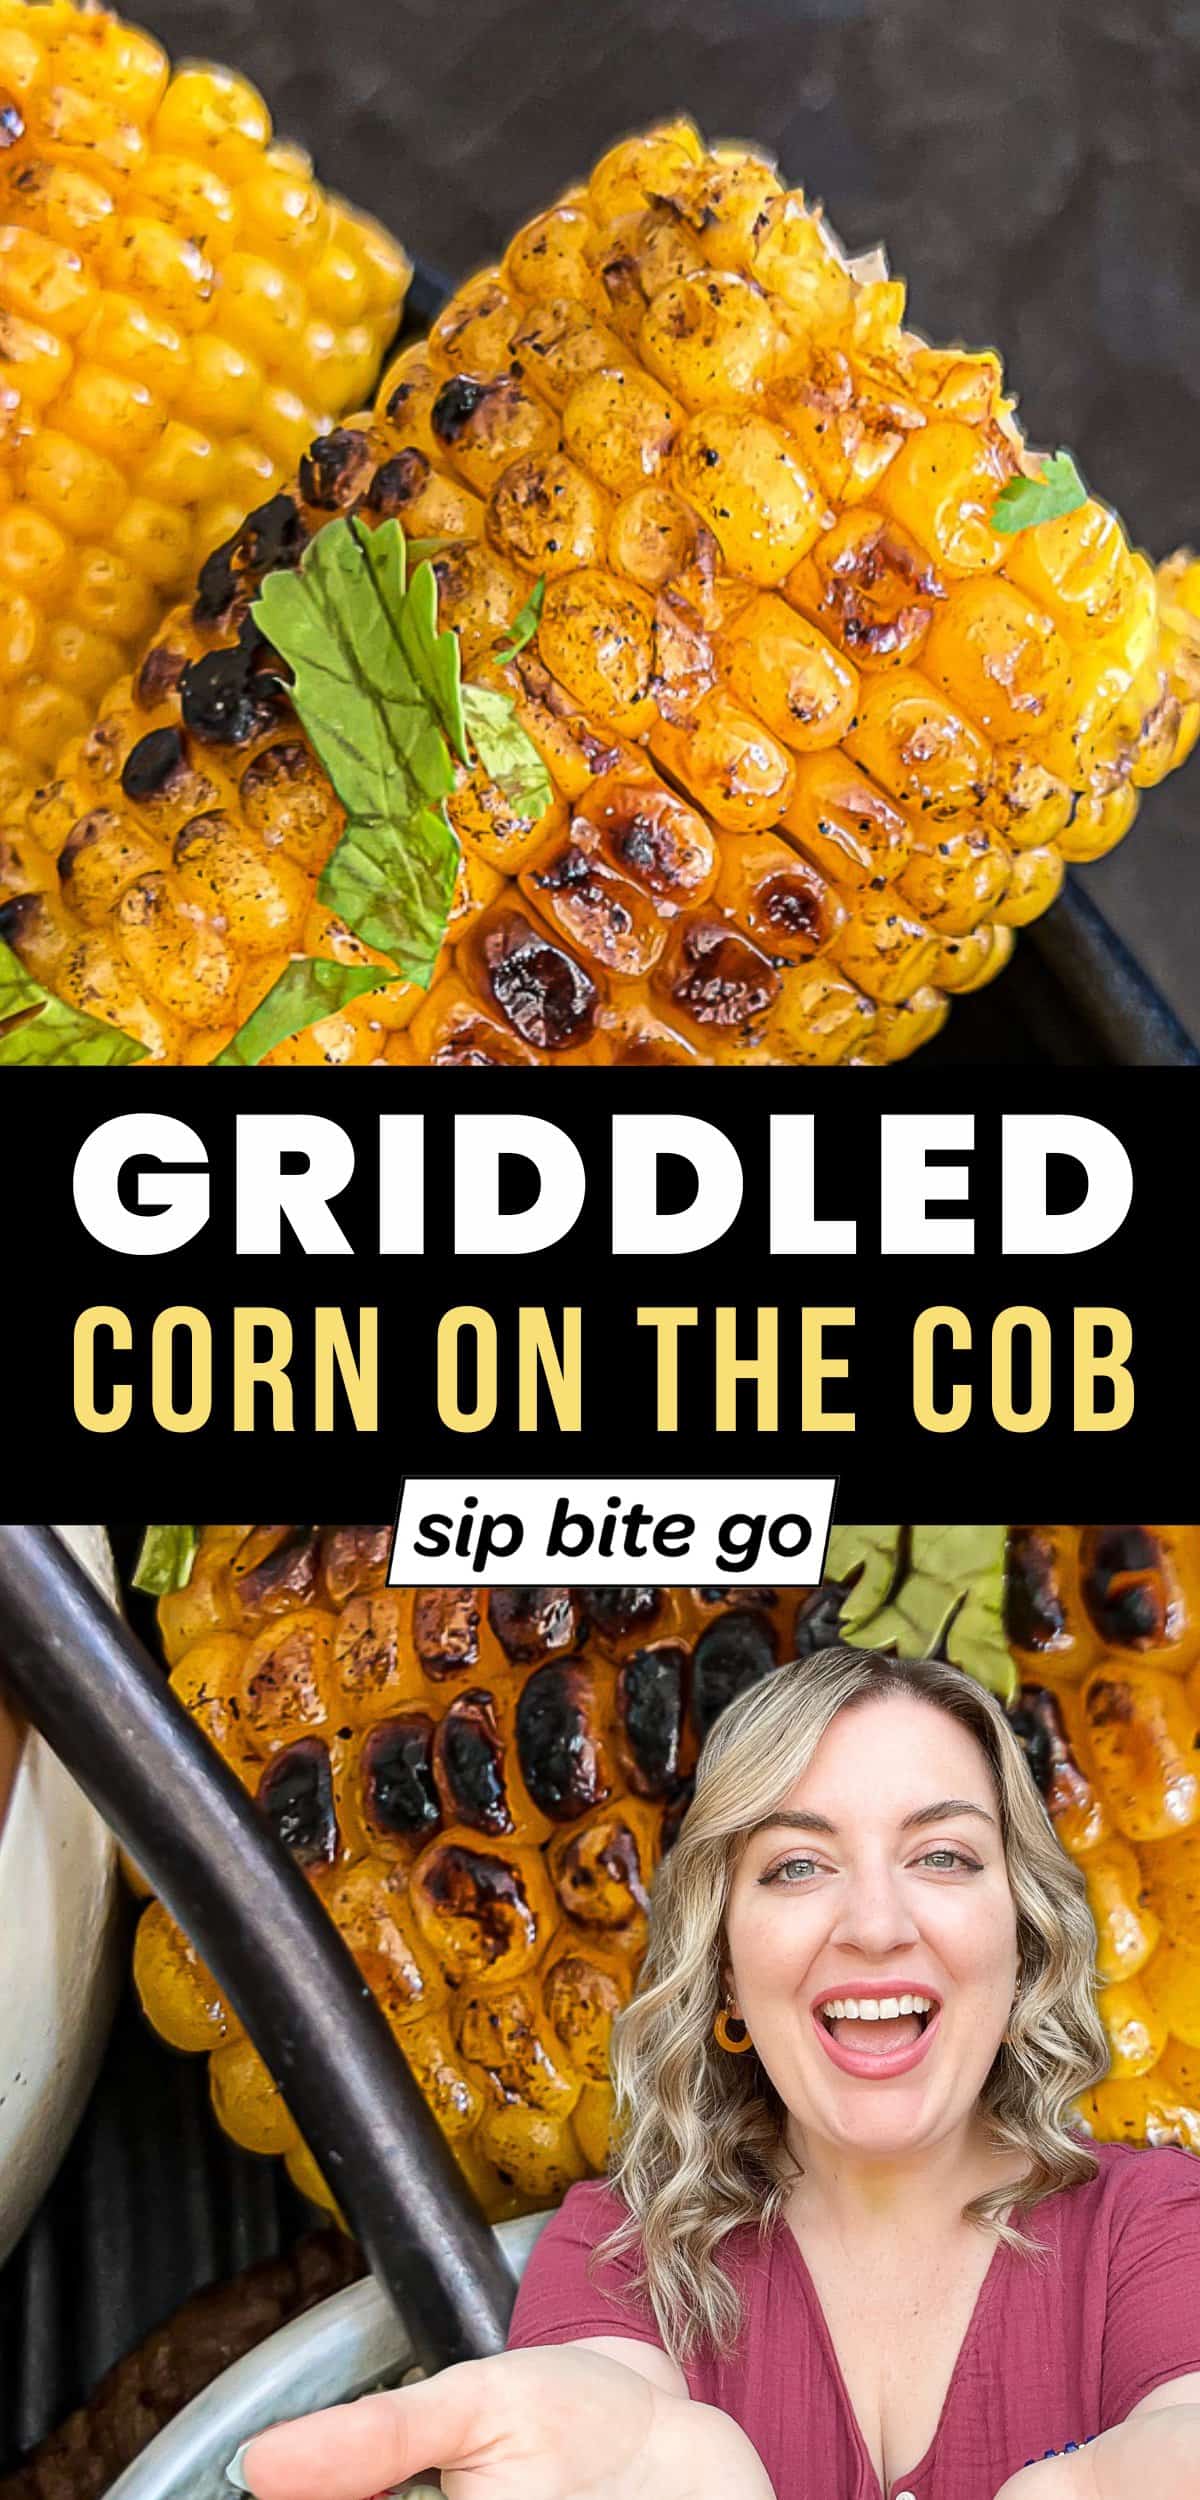 Griddle corn on the cob recipe image with text overlay and Jenna Passaro and Sip Bite Go logo